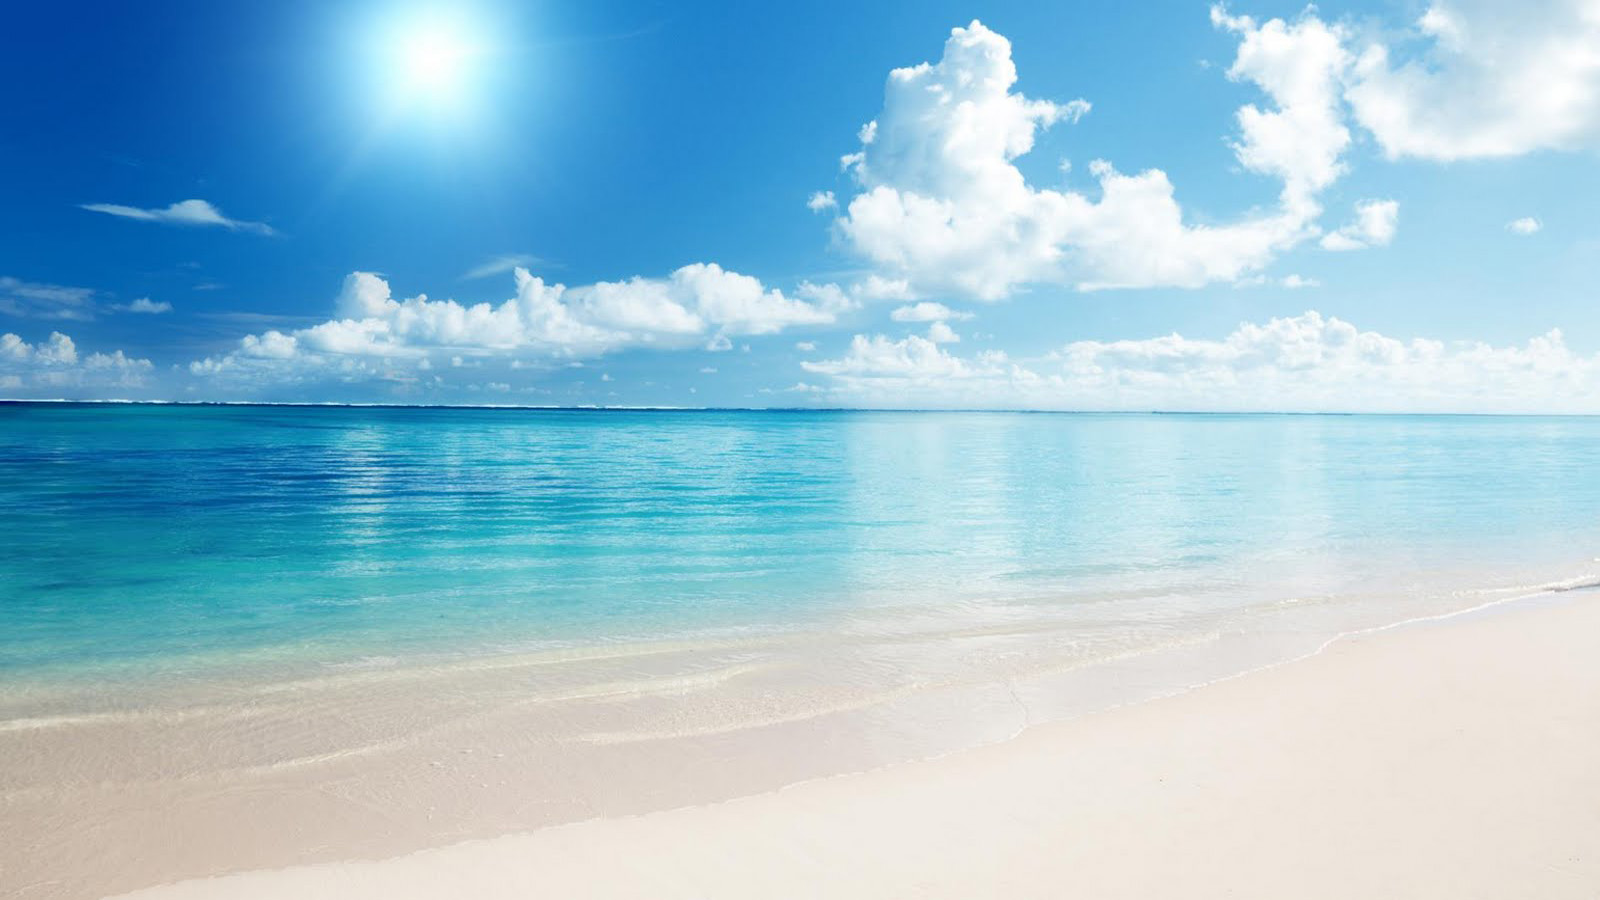 Sunny Beach Wallpaper photos of How to Choose Beautiful Backgrounds 1600x900